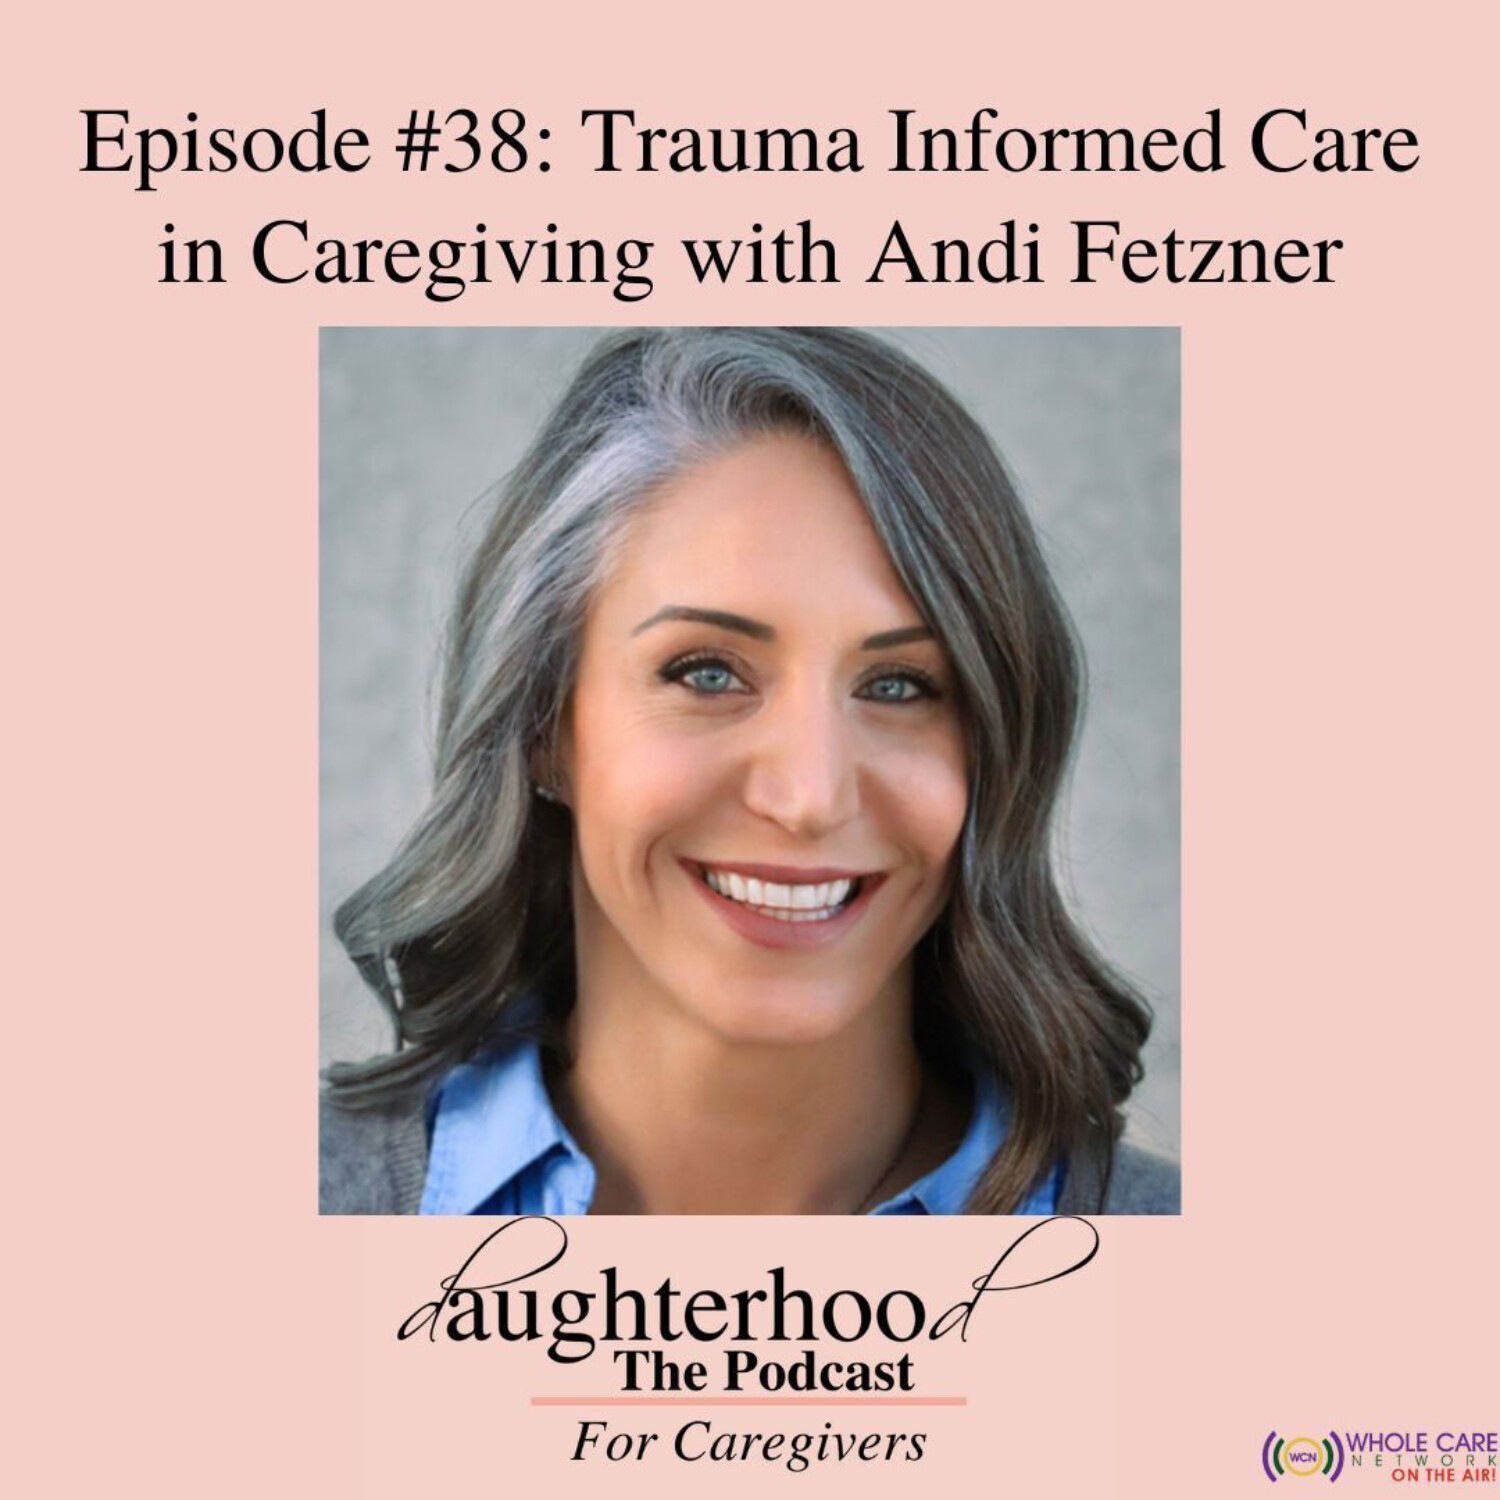 Trauma-Informed Care in Caregiving with Andi Fetzner